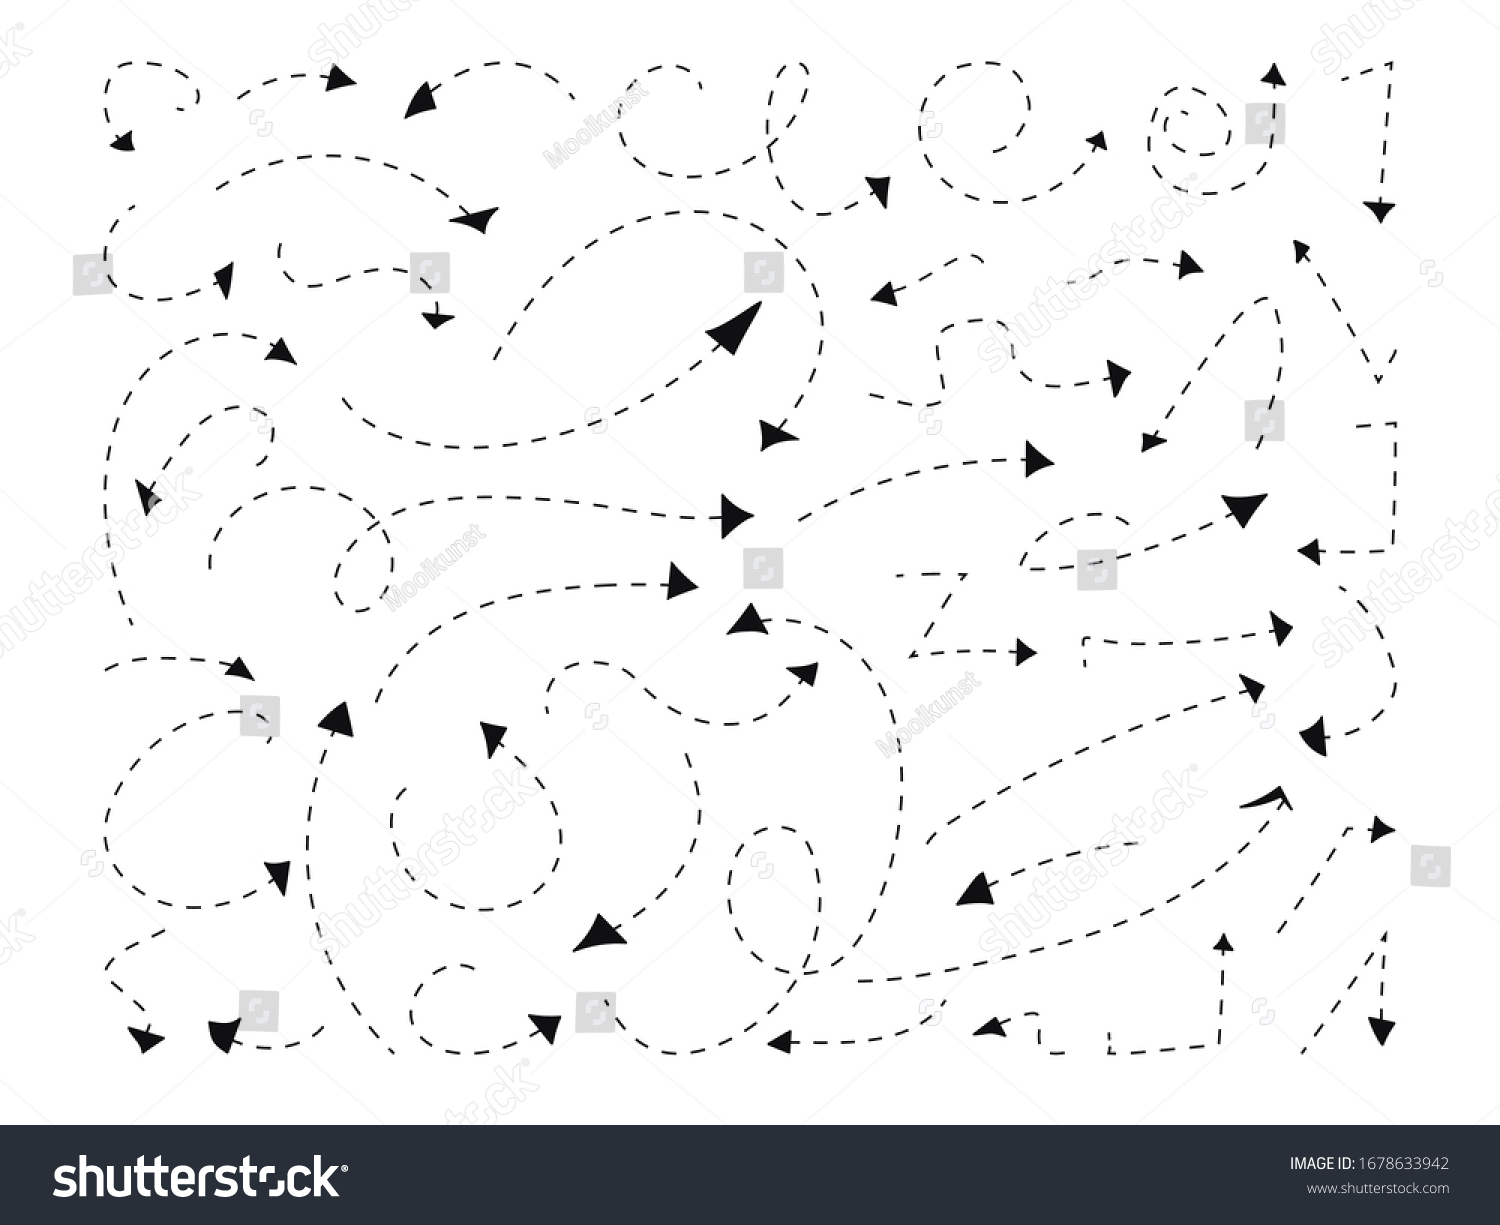 SVG of Handdrawn black dotted line arrows set. Doodle left right down direction sign. Sketch curve dash zigzag arrow symbol. Business growth up graphic design elements. Isolated on white vector illustration svg